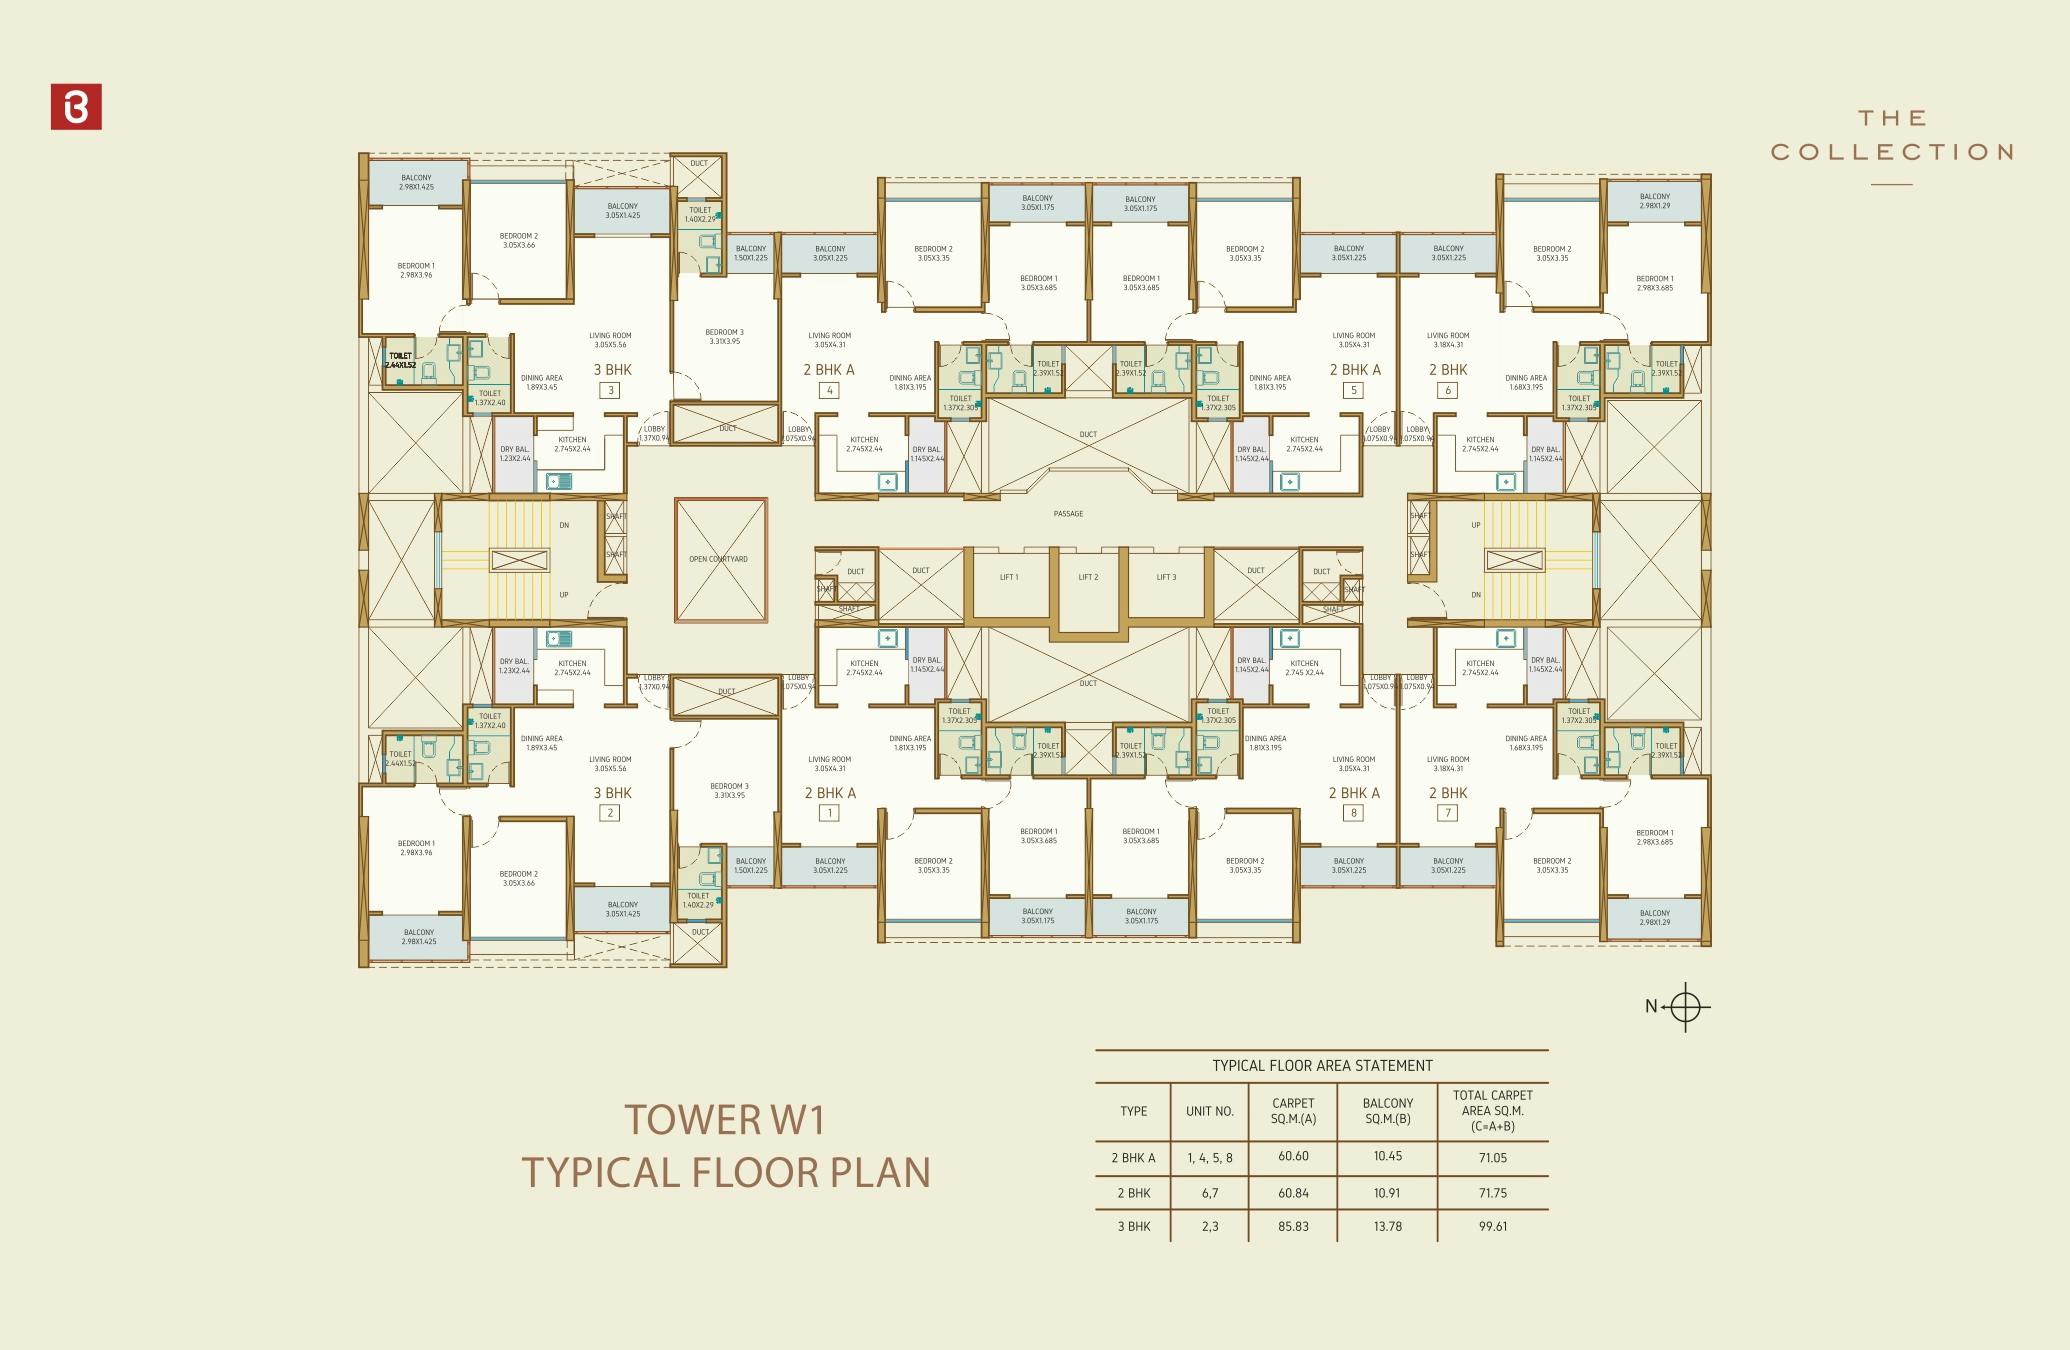 The Collection Tower W1 Typical Plan